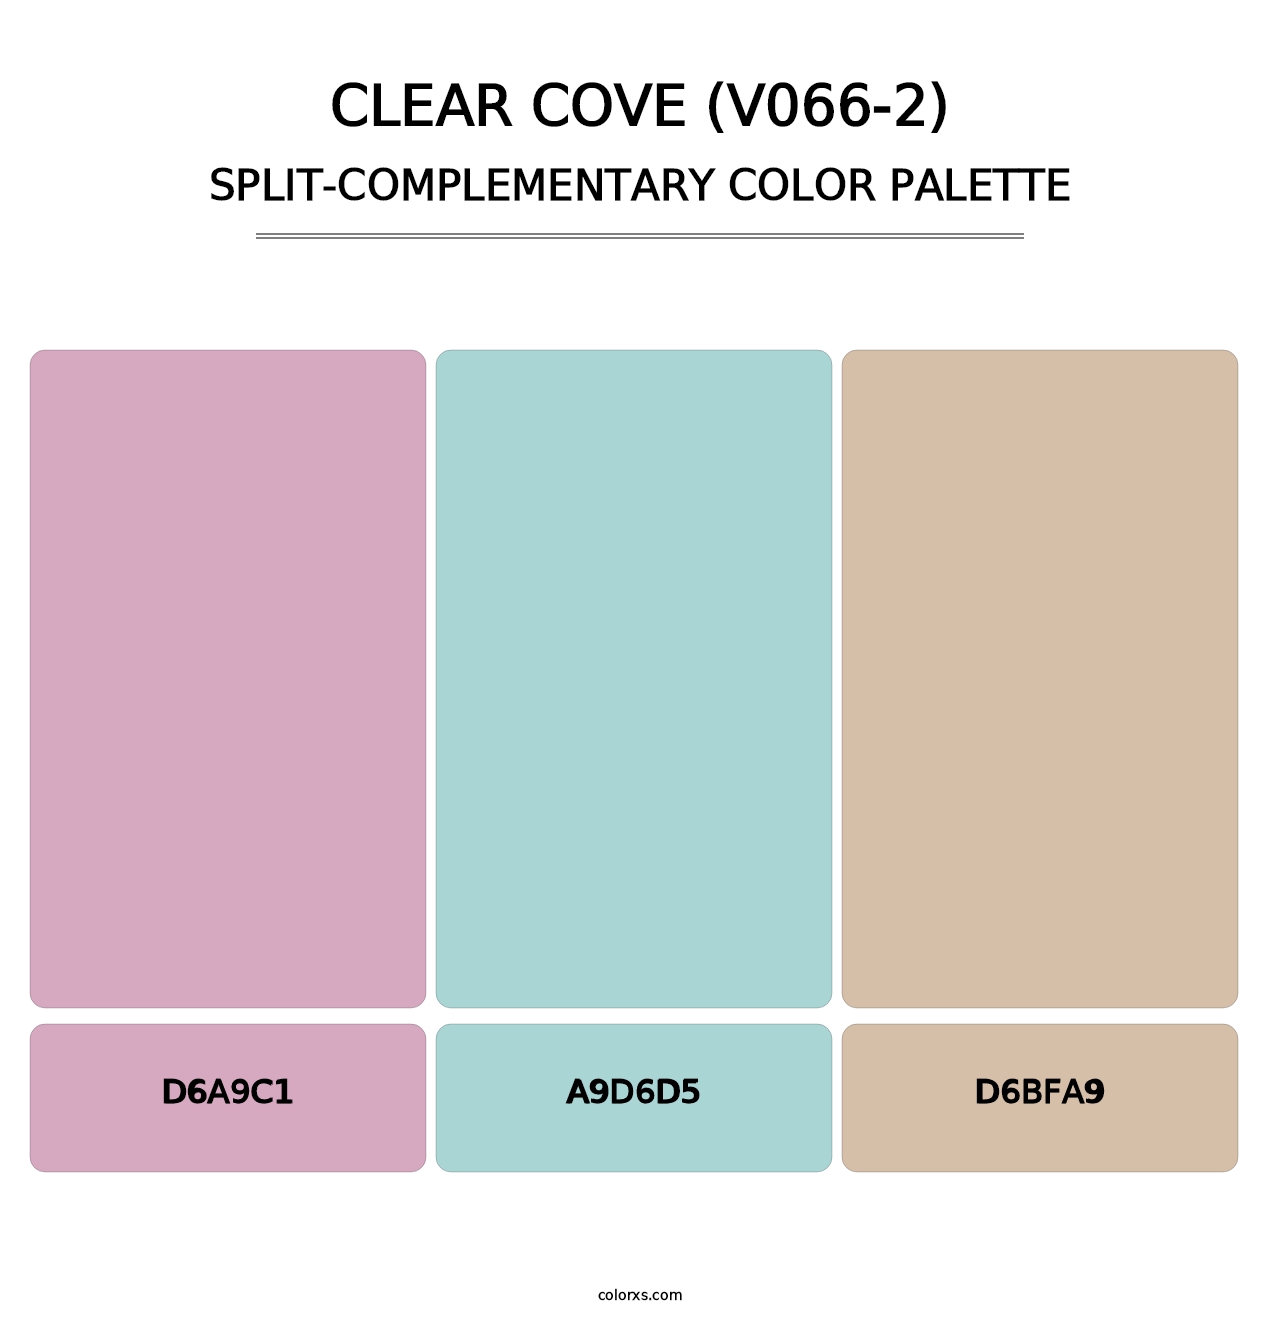 Clear Cove (V066-2) - Split-Complementary Color Palette